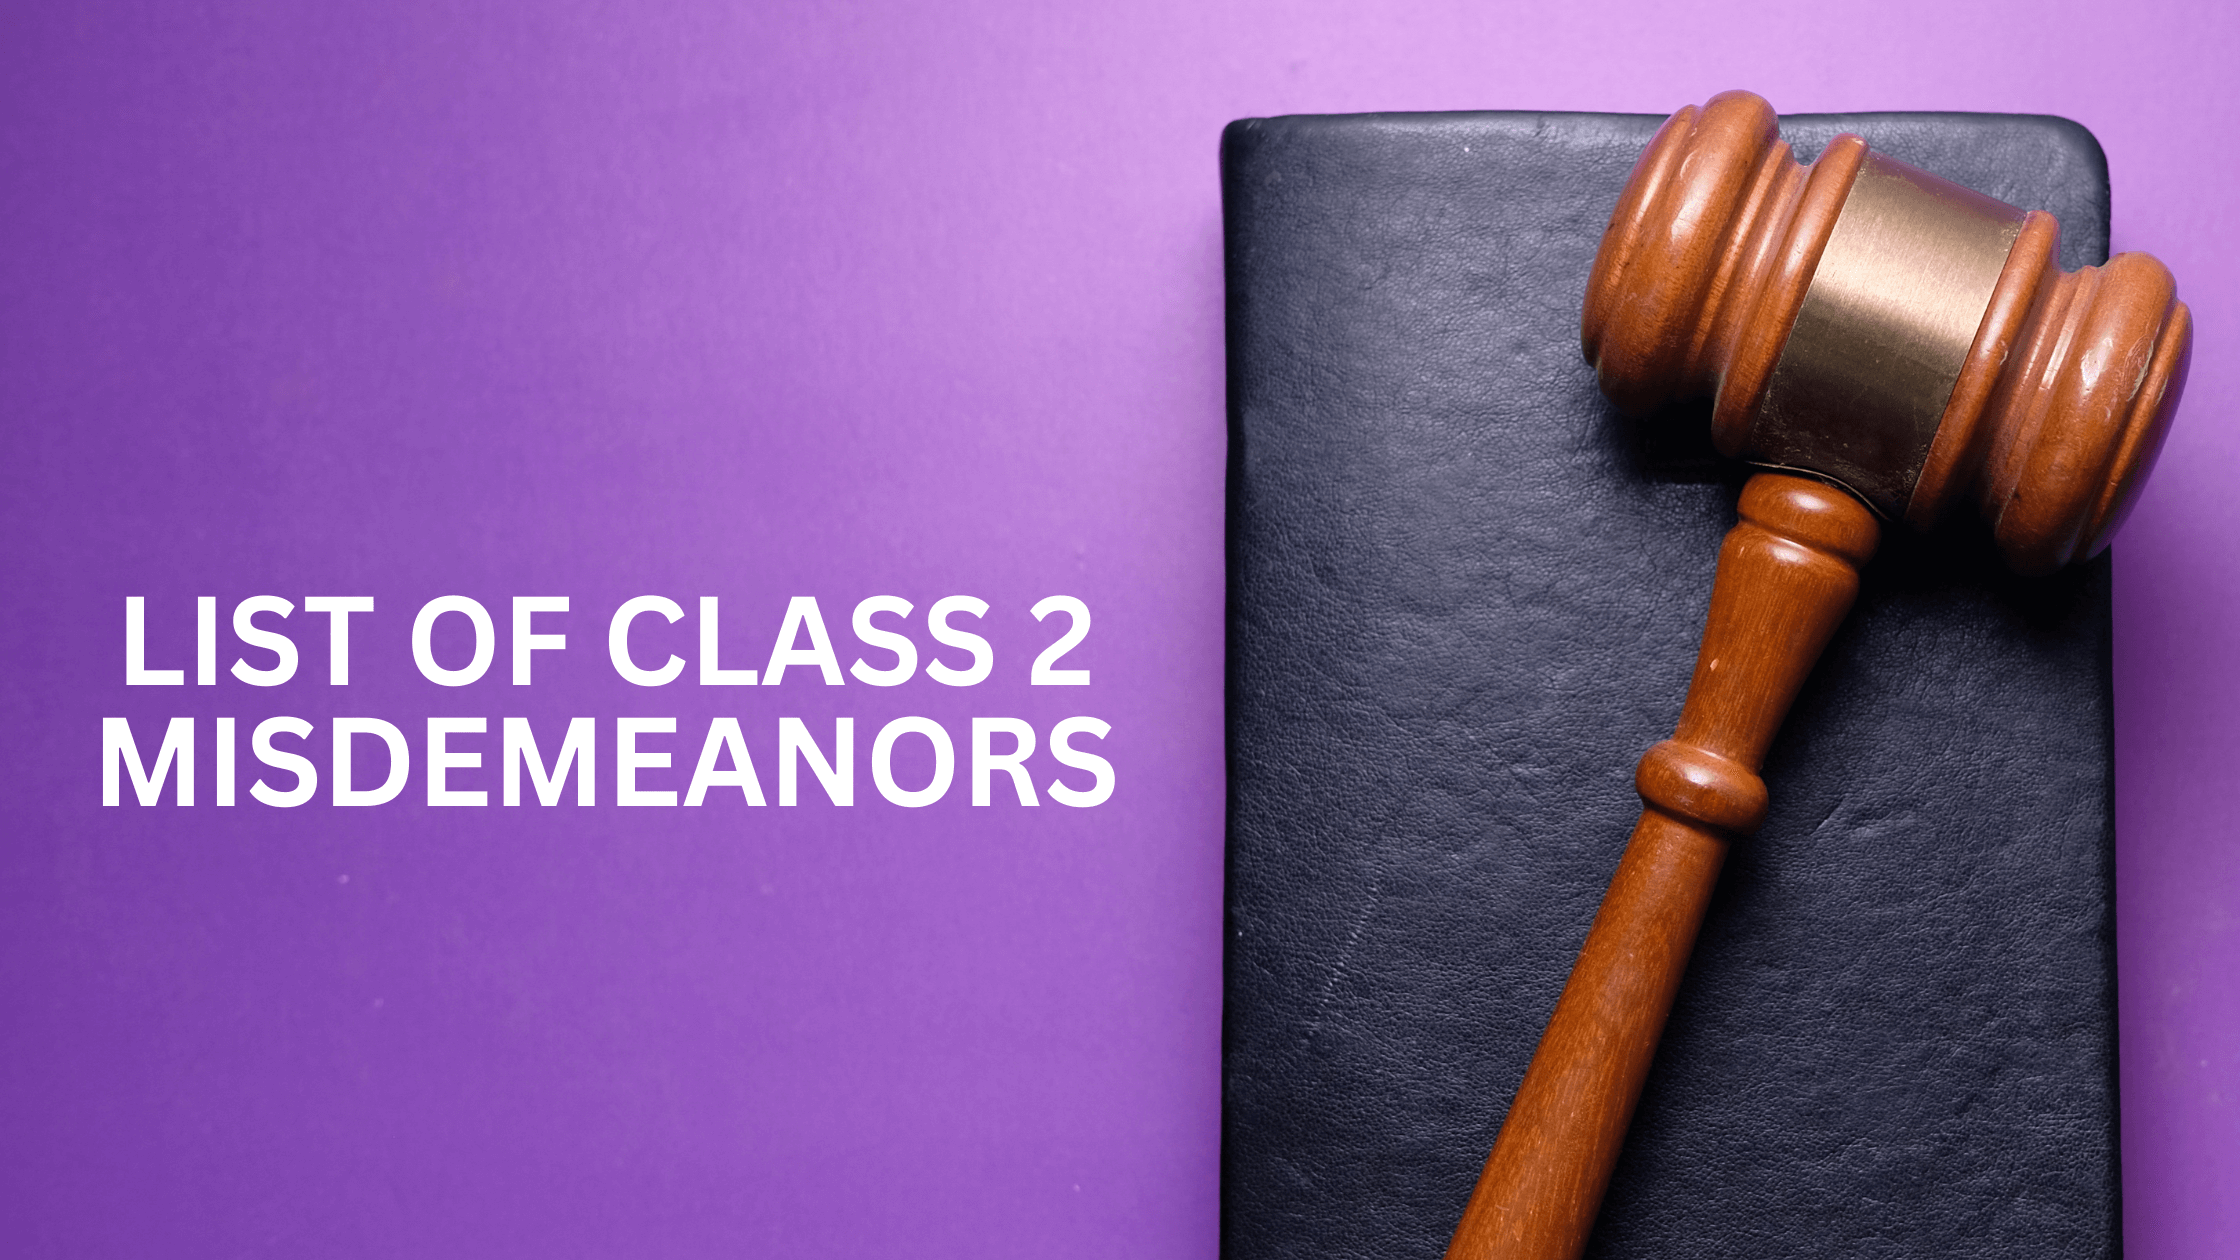 Class 2 misdemeanors Arizona legal book with gavel on purple background.